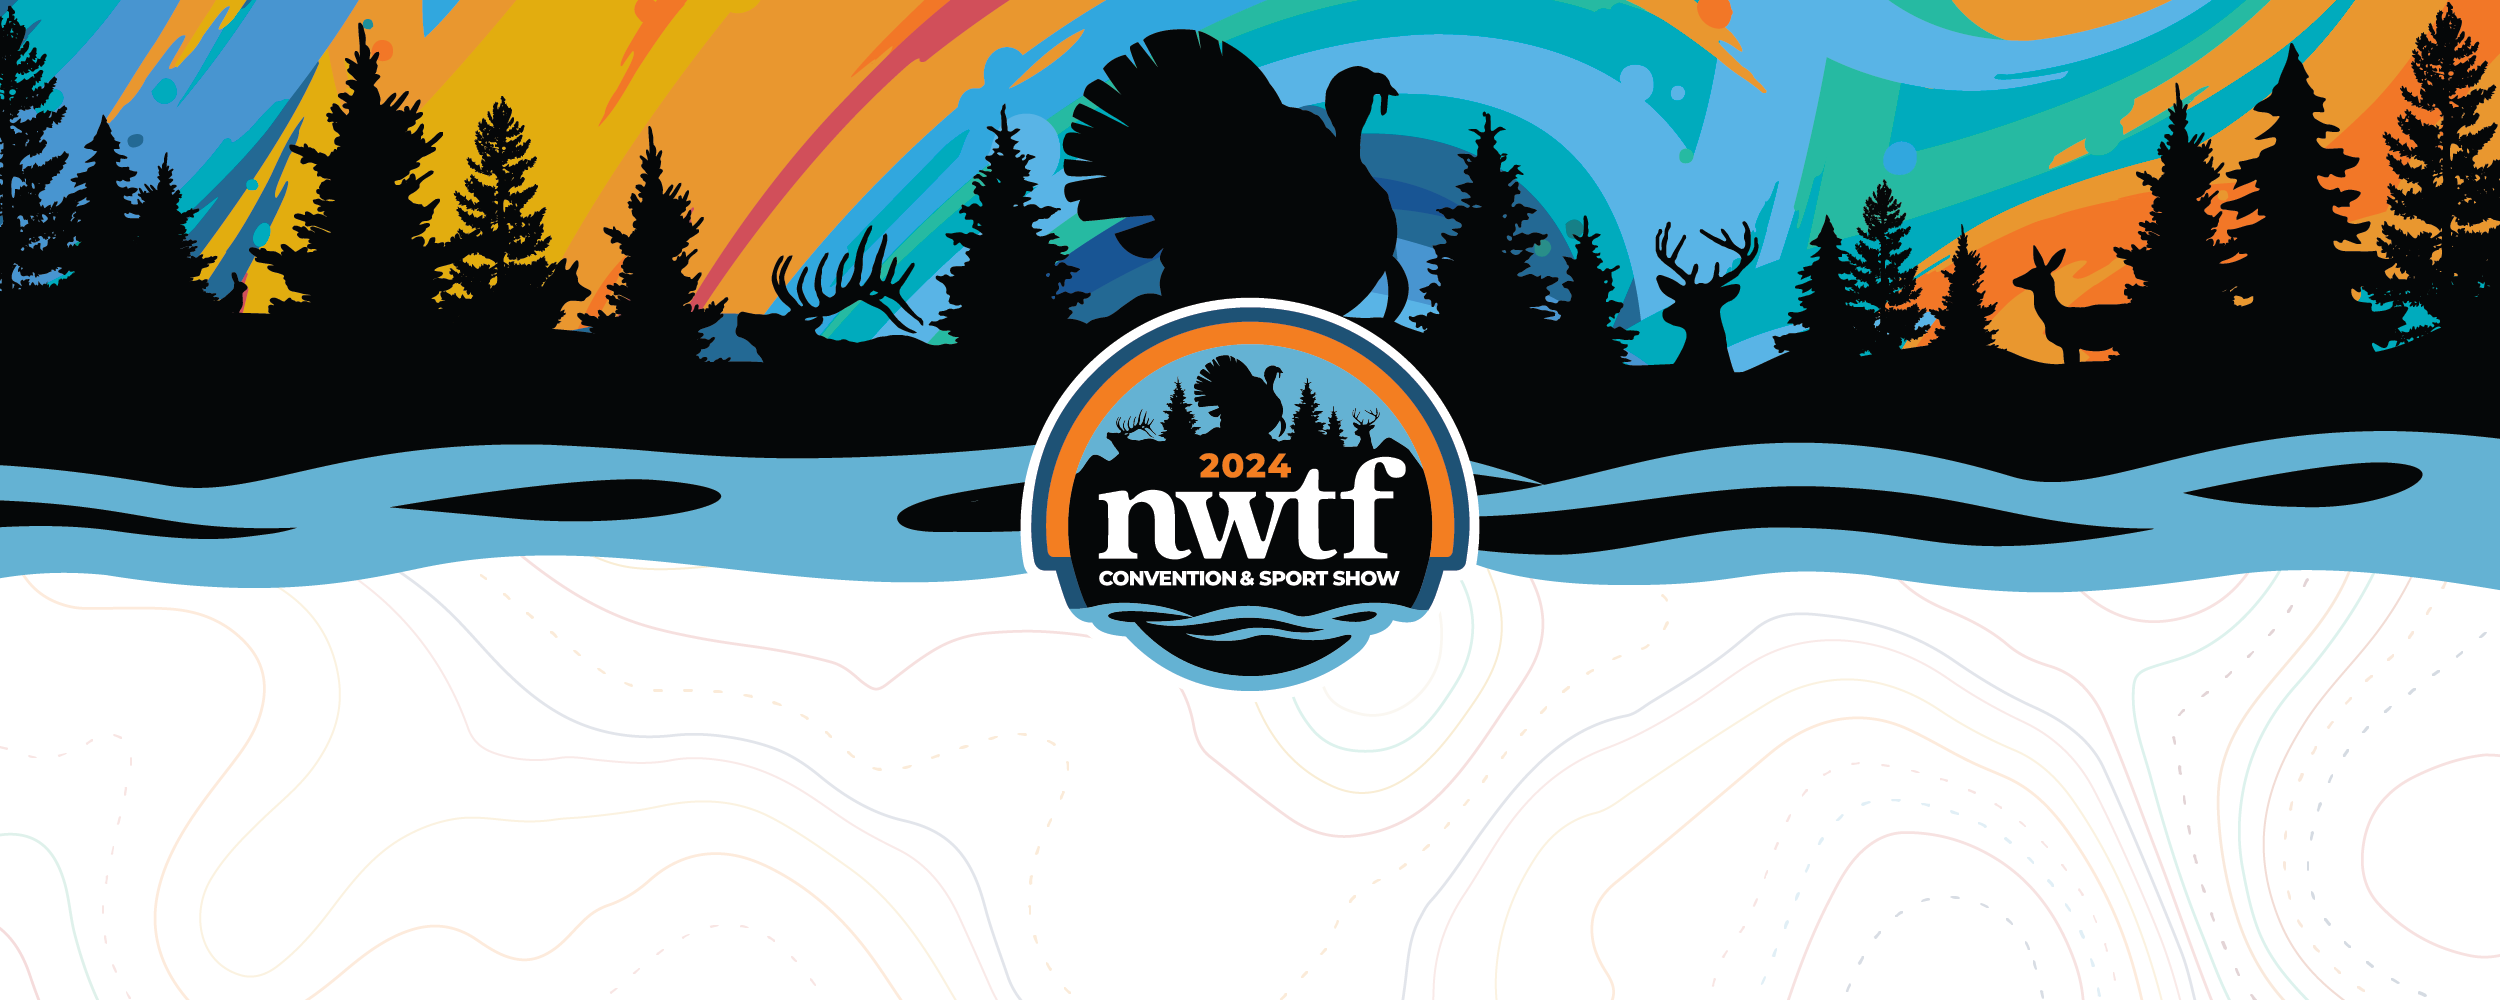 NWTF Convention - The National Wild Turkey Federation